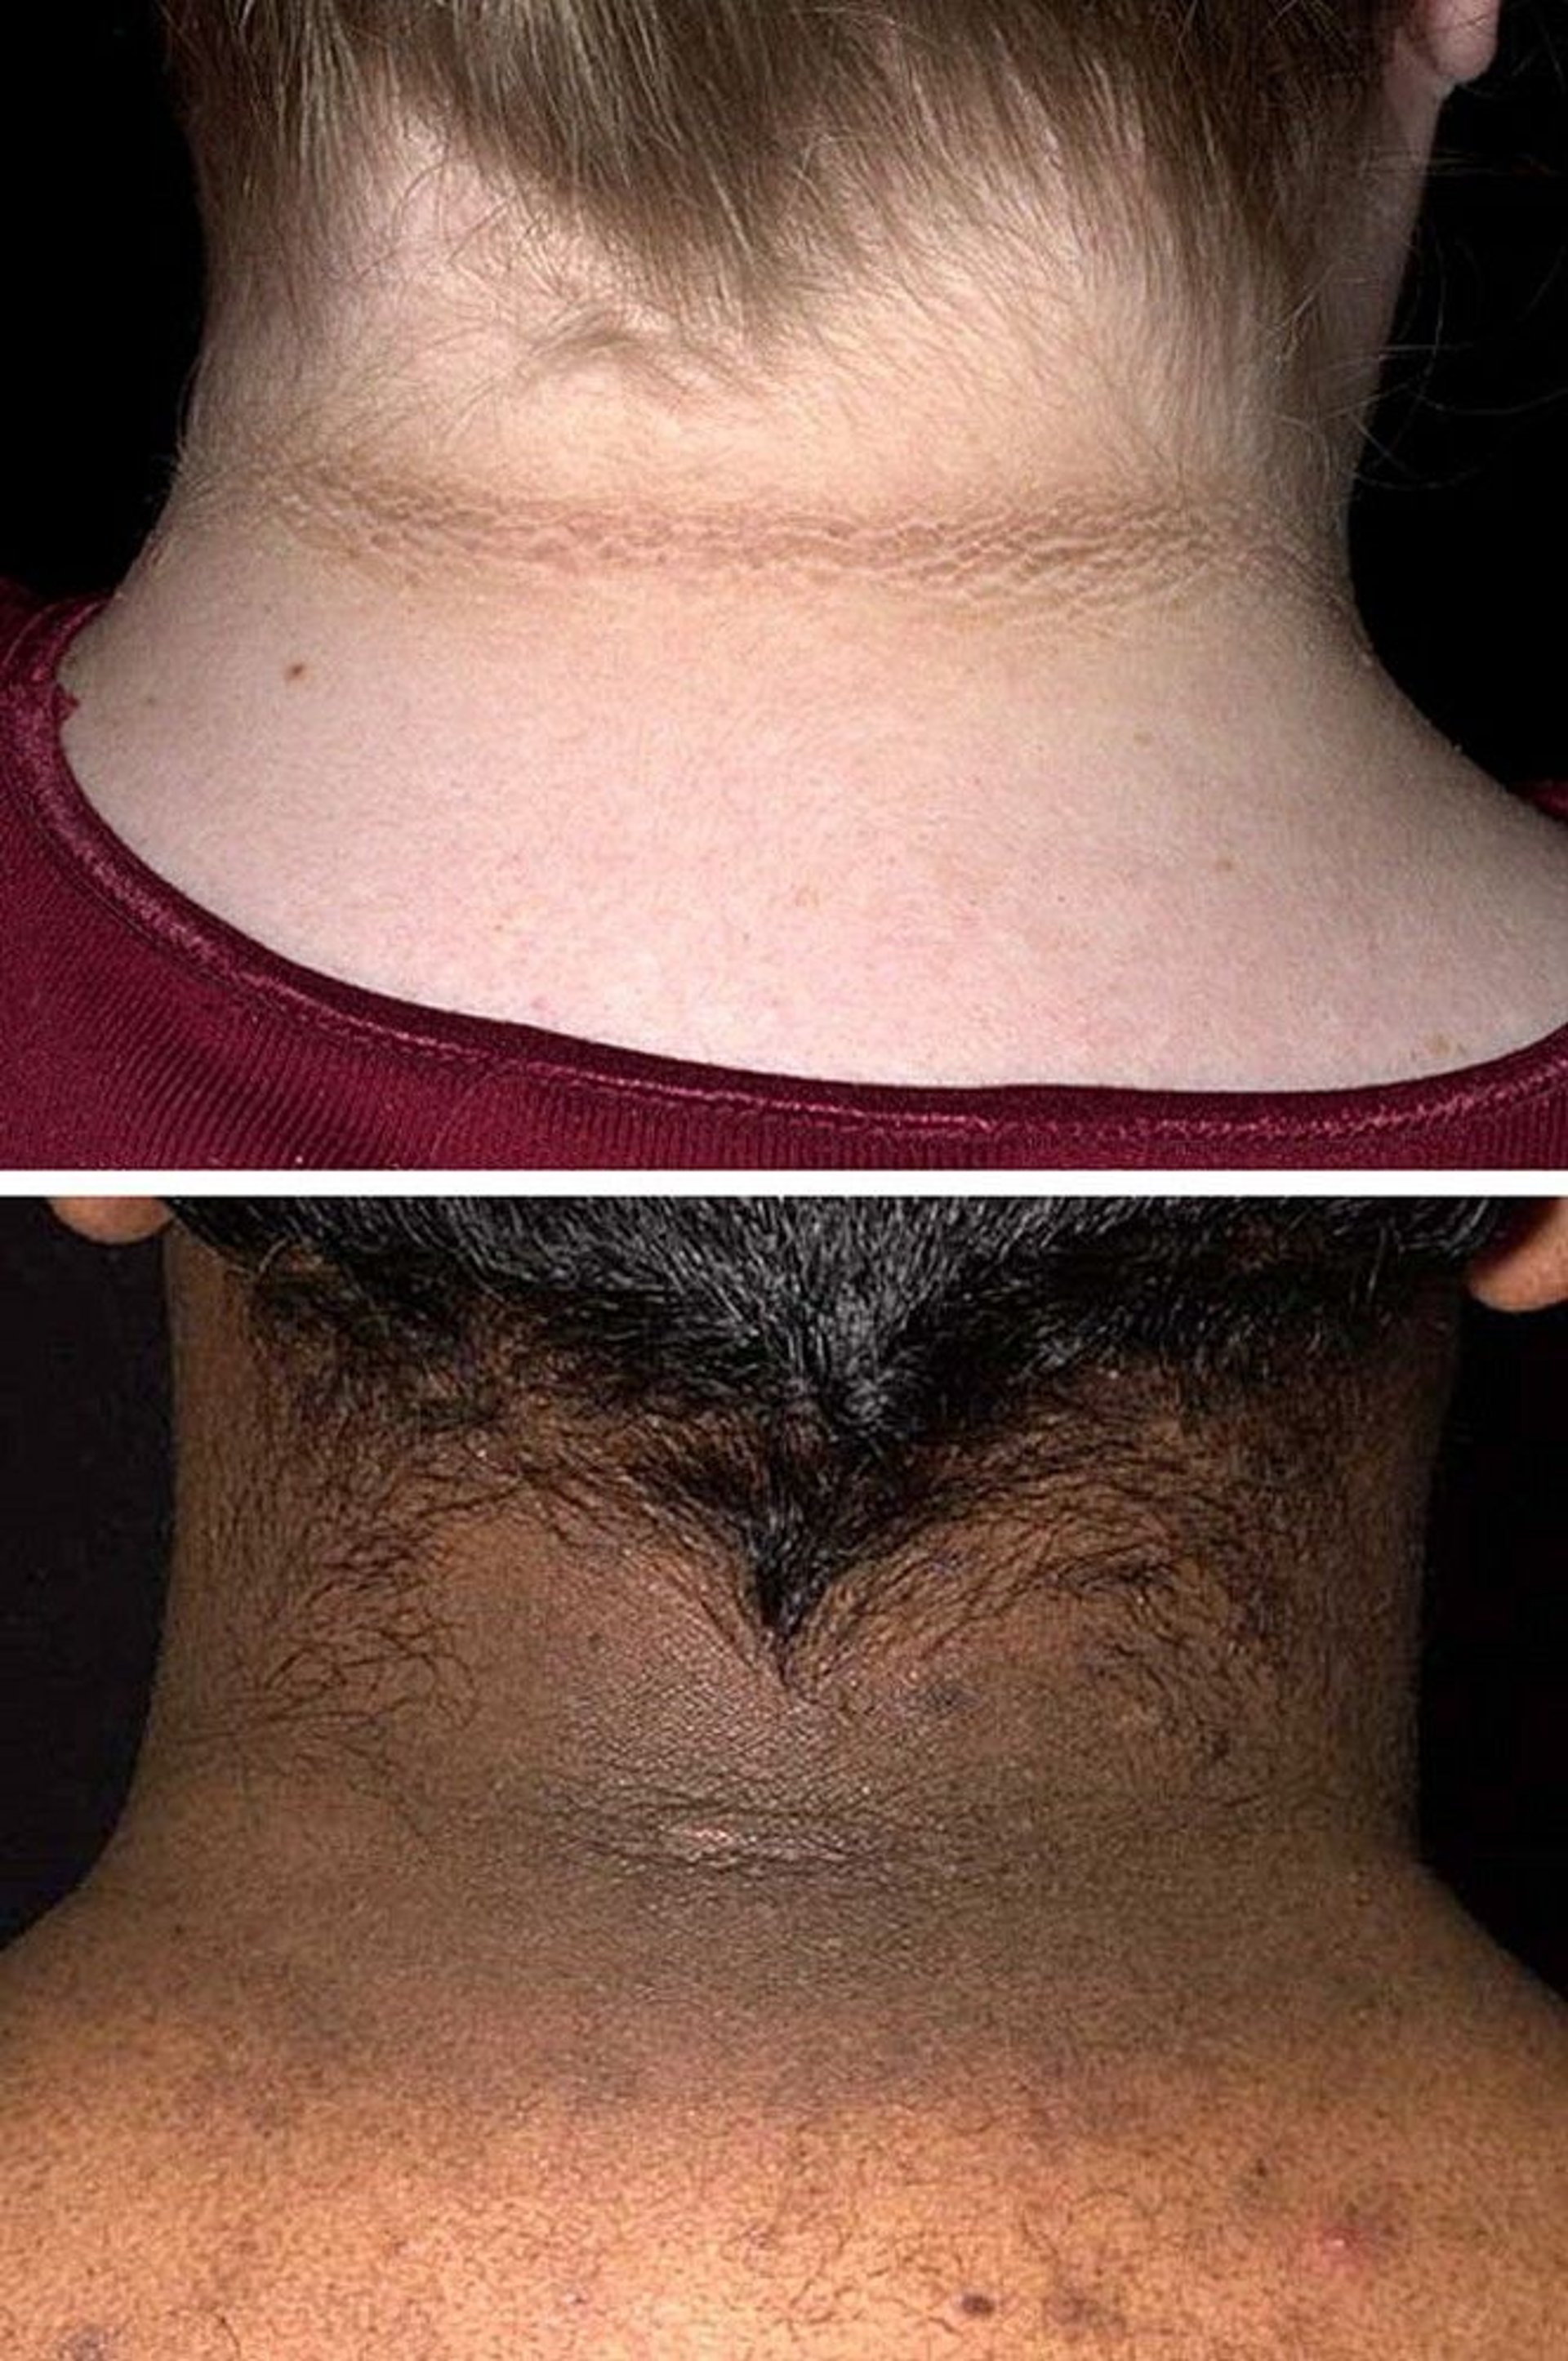 Acanthosis Nigricans in Polycystic Ovary Syndrome